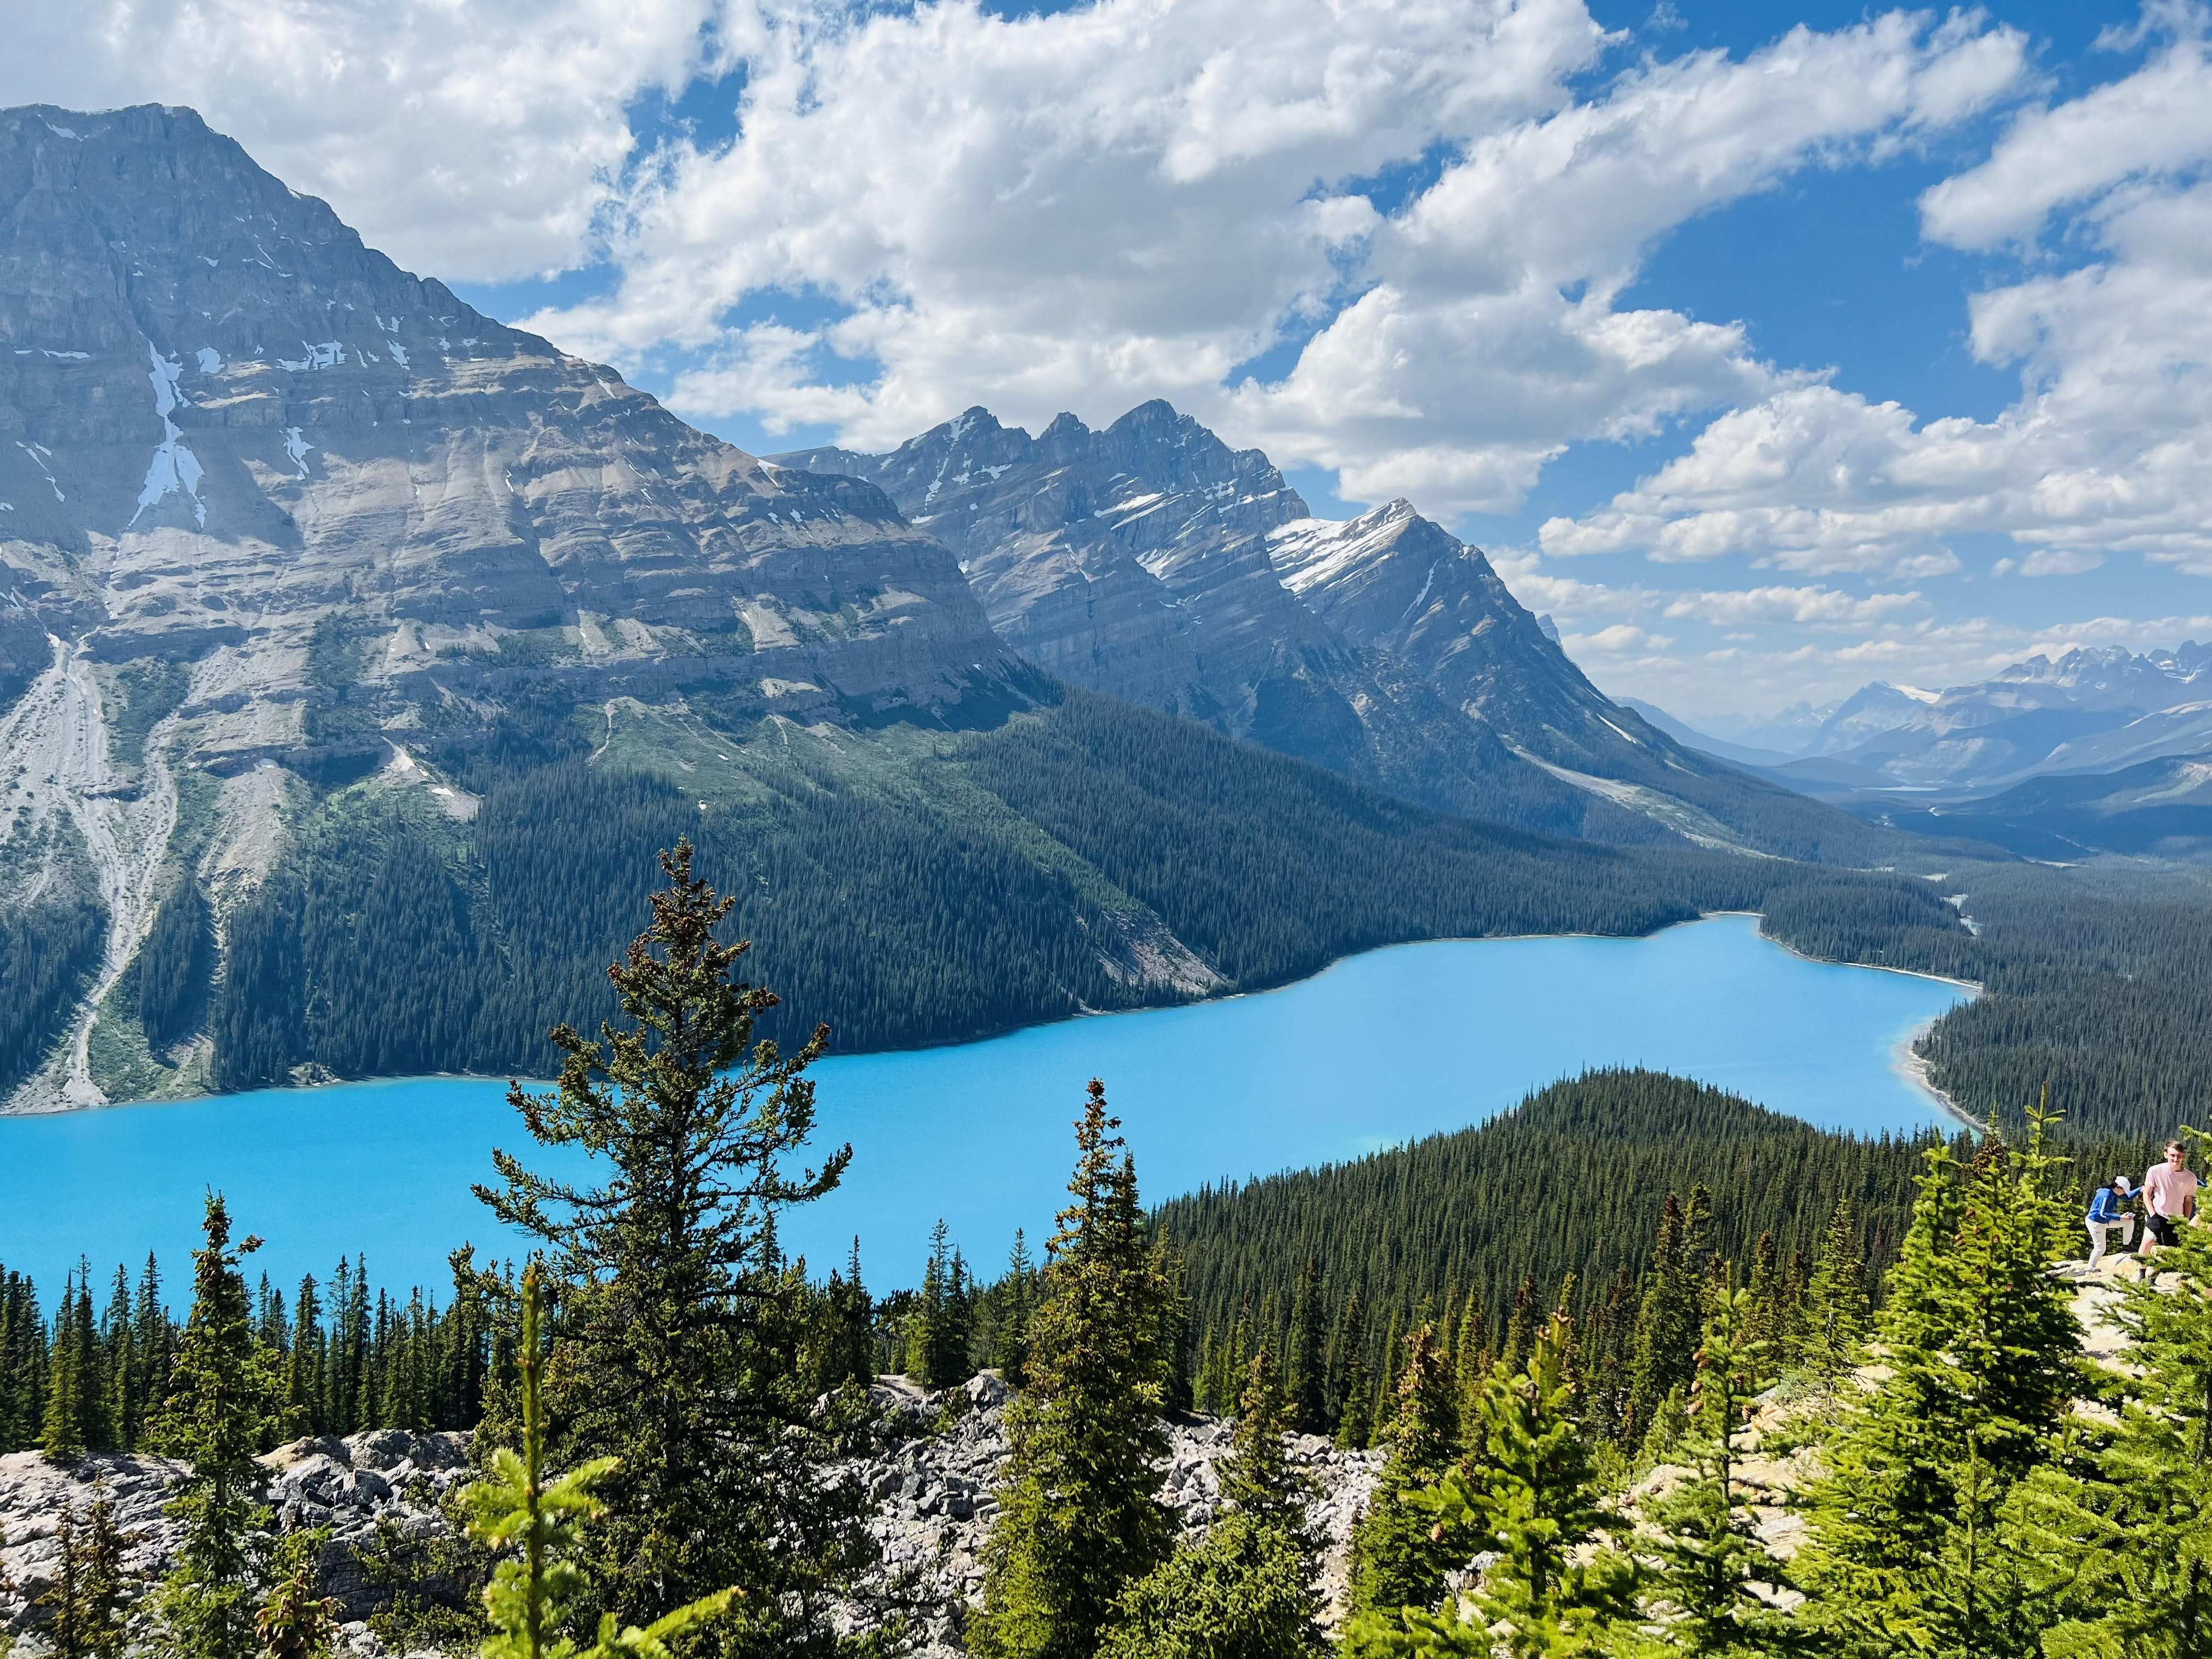 Vibrant turquoise waters of Peyto Lake in Banff National Park, Canada, with a lush coniferous forest in the foreground and majestic snow-capped Rocky Mountains under a bright blue sky dotted with fluffy clouds.